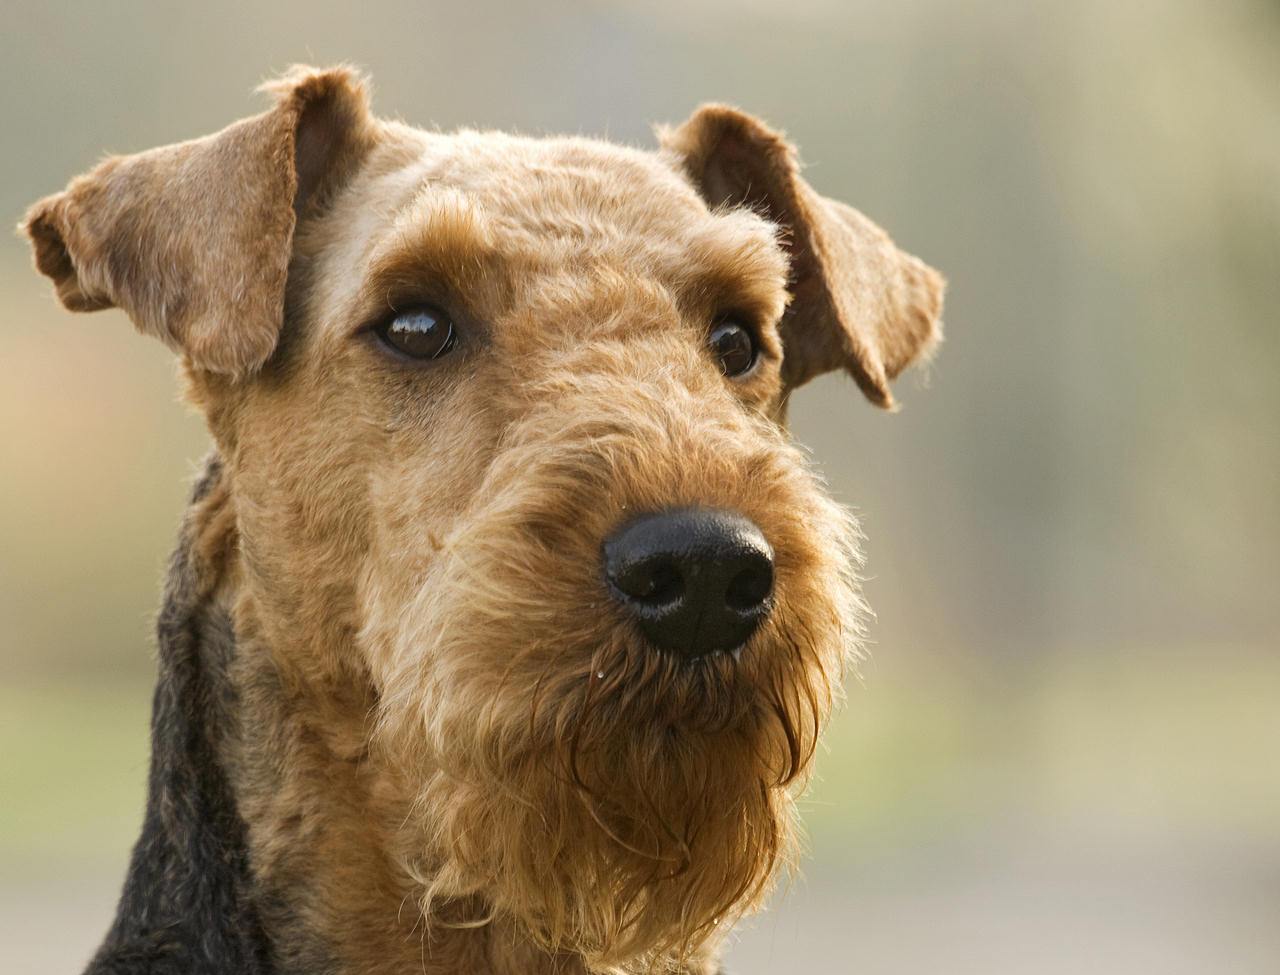 Thoughtful Airedale Terrier Photo And Wallpaper Beautiful